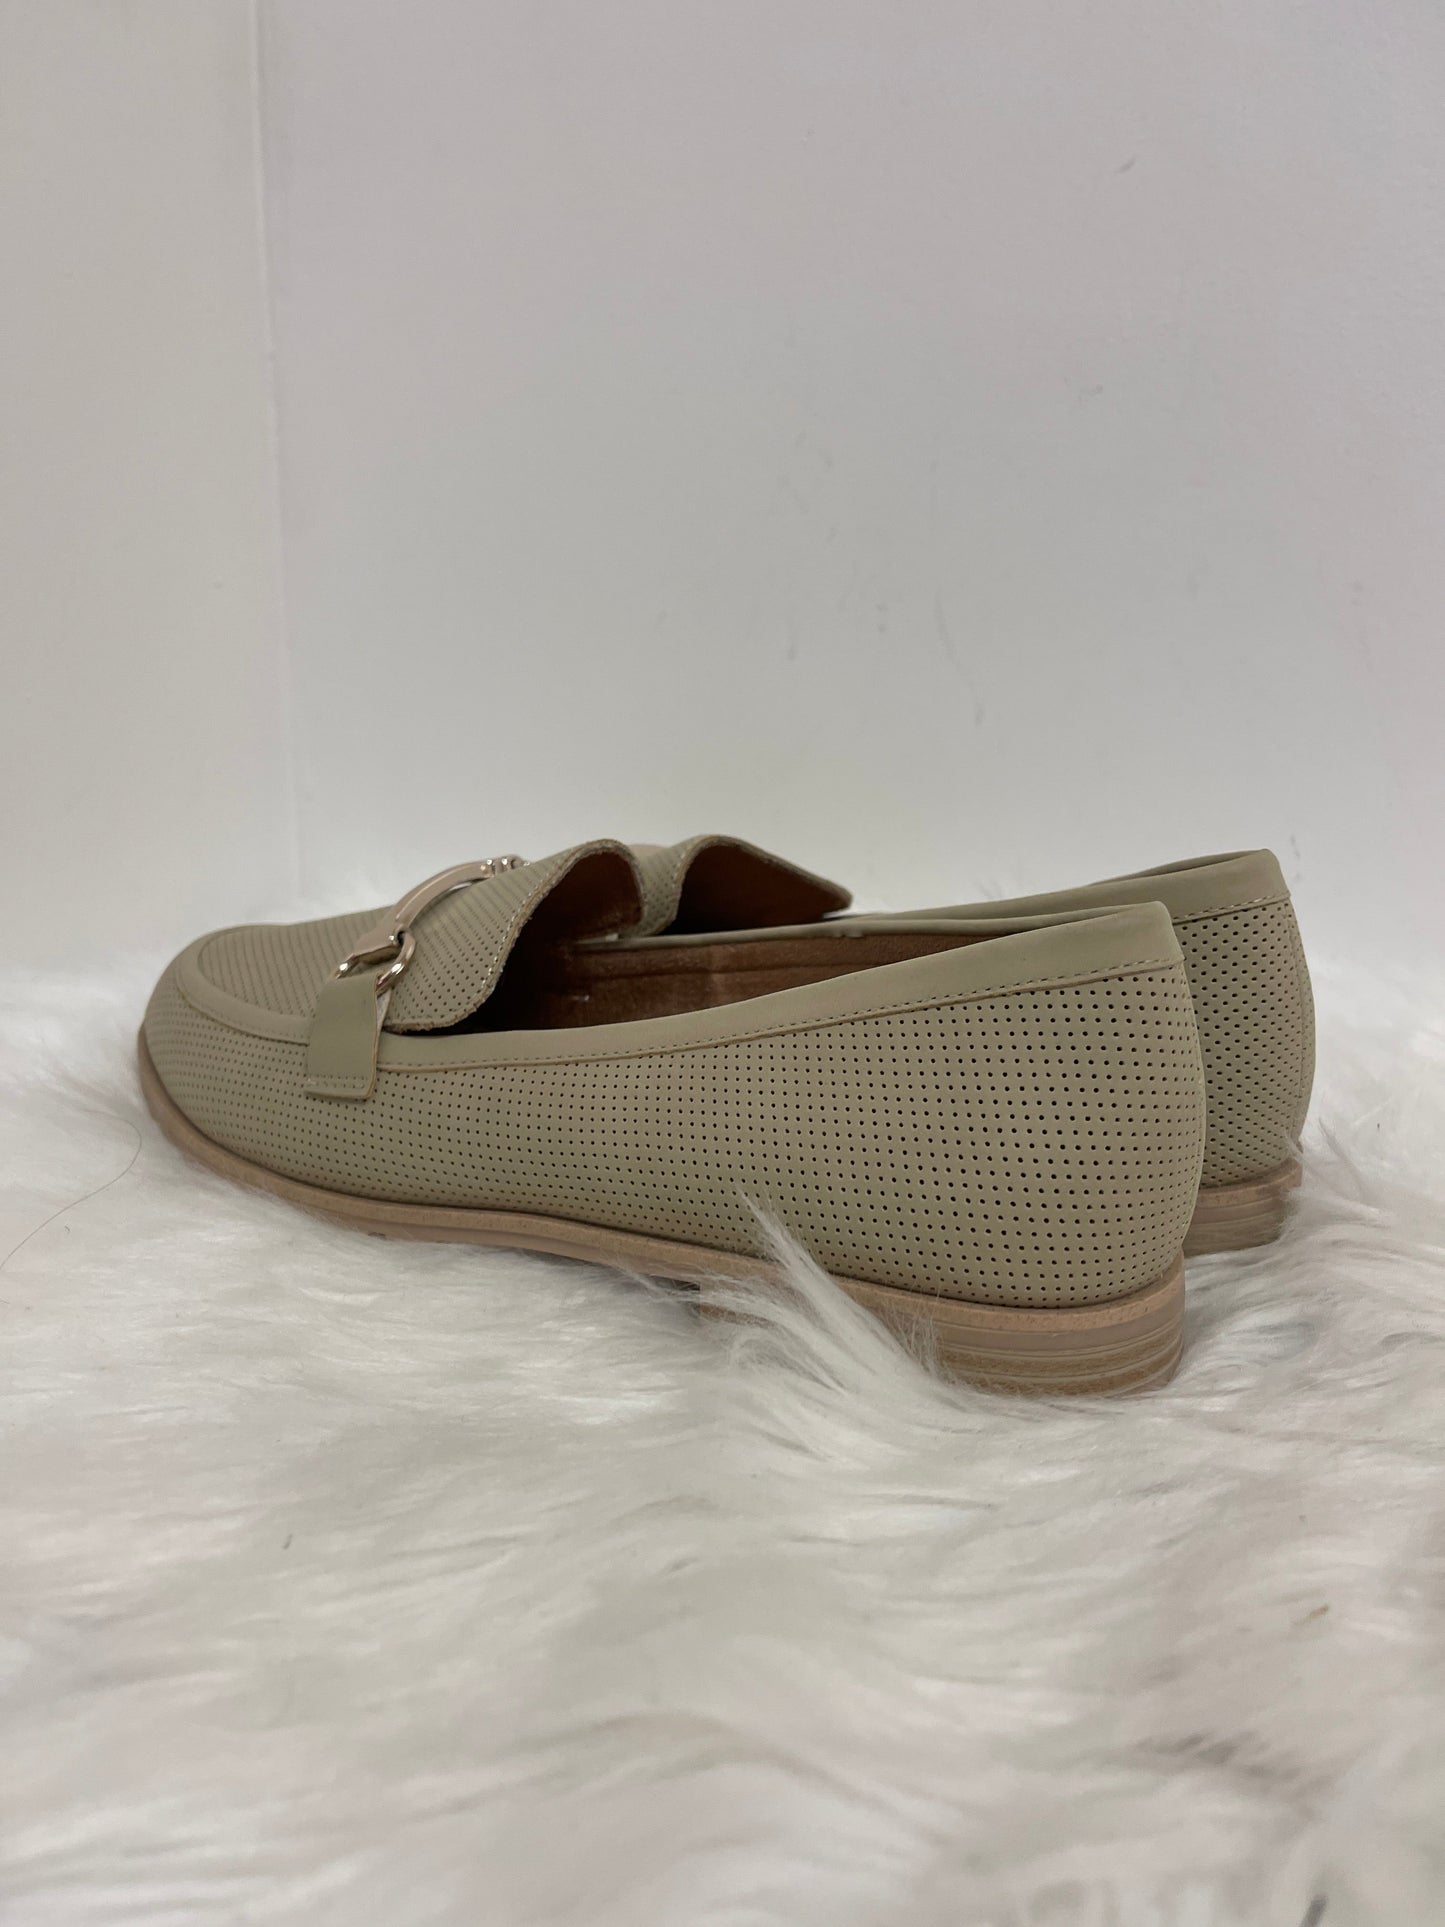 Tan Shoes Flats Kelly And Katie, Size 10